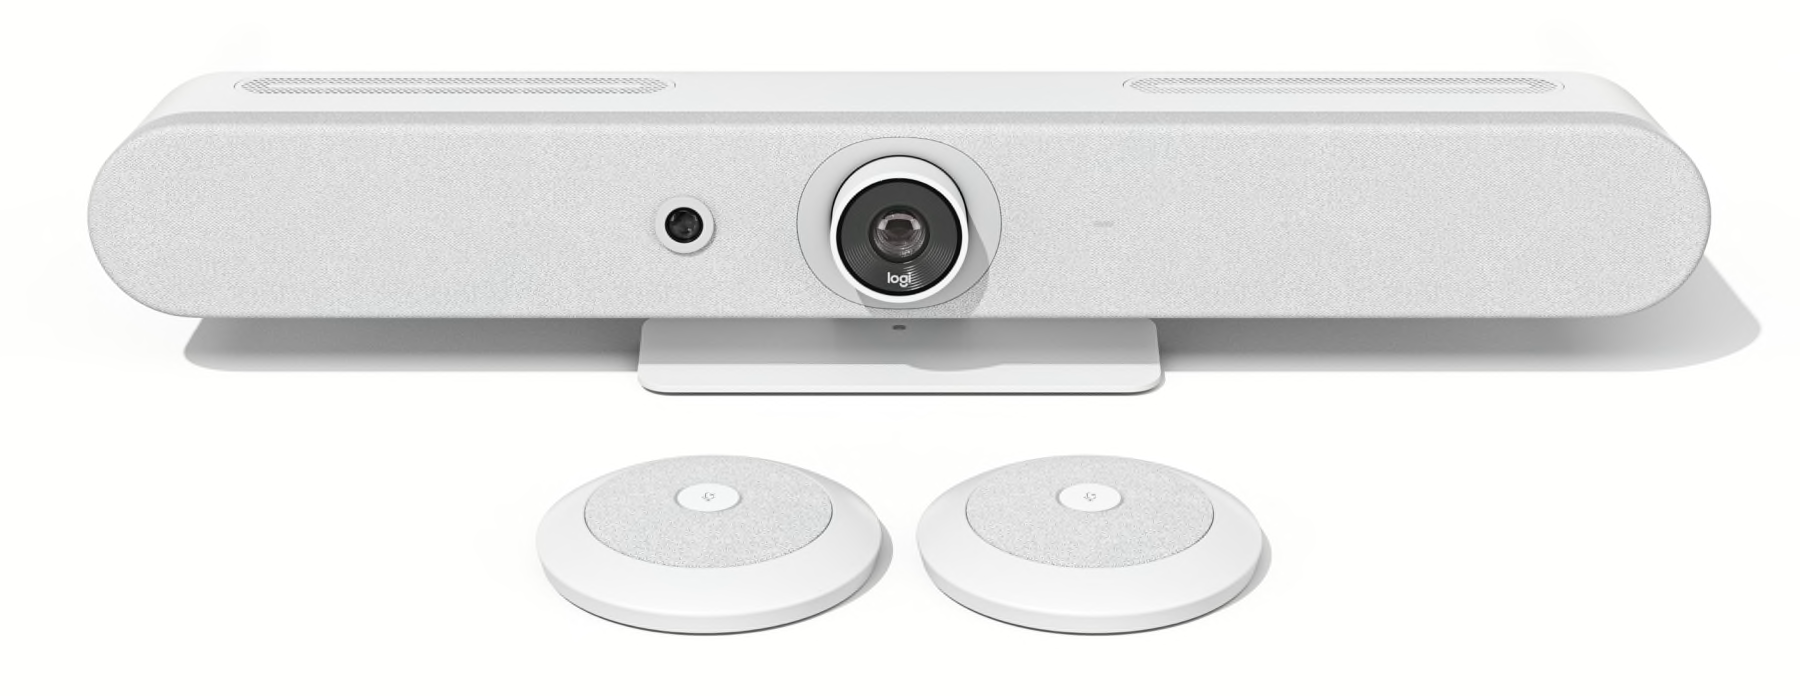 Logitech Rally Bar Mini - All-In-One Video Conferencing System